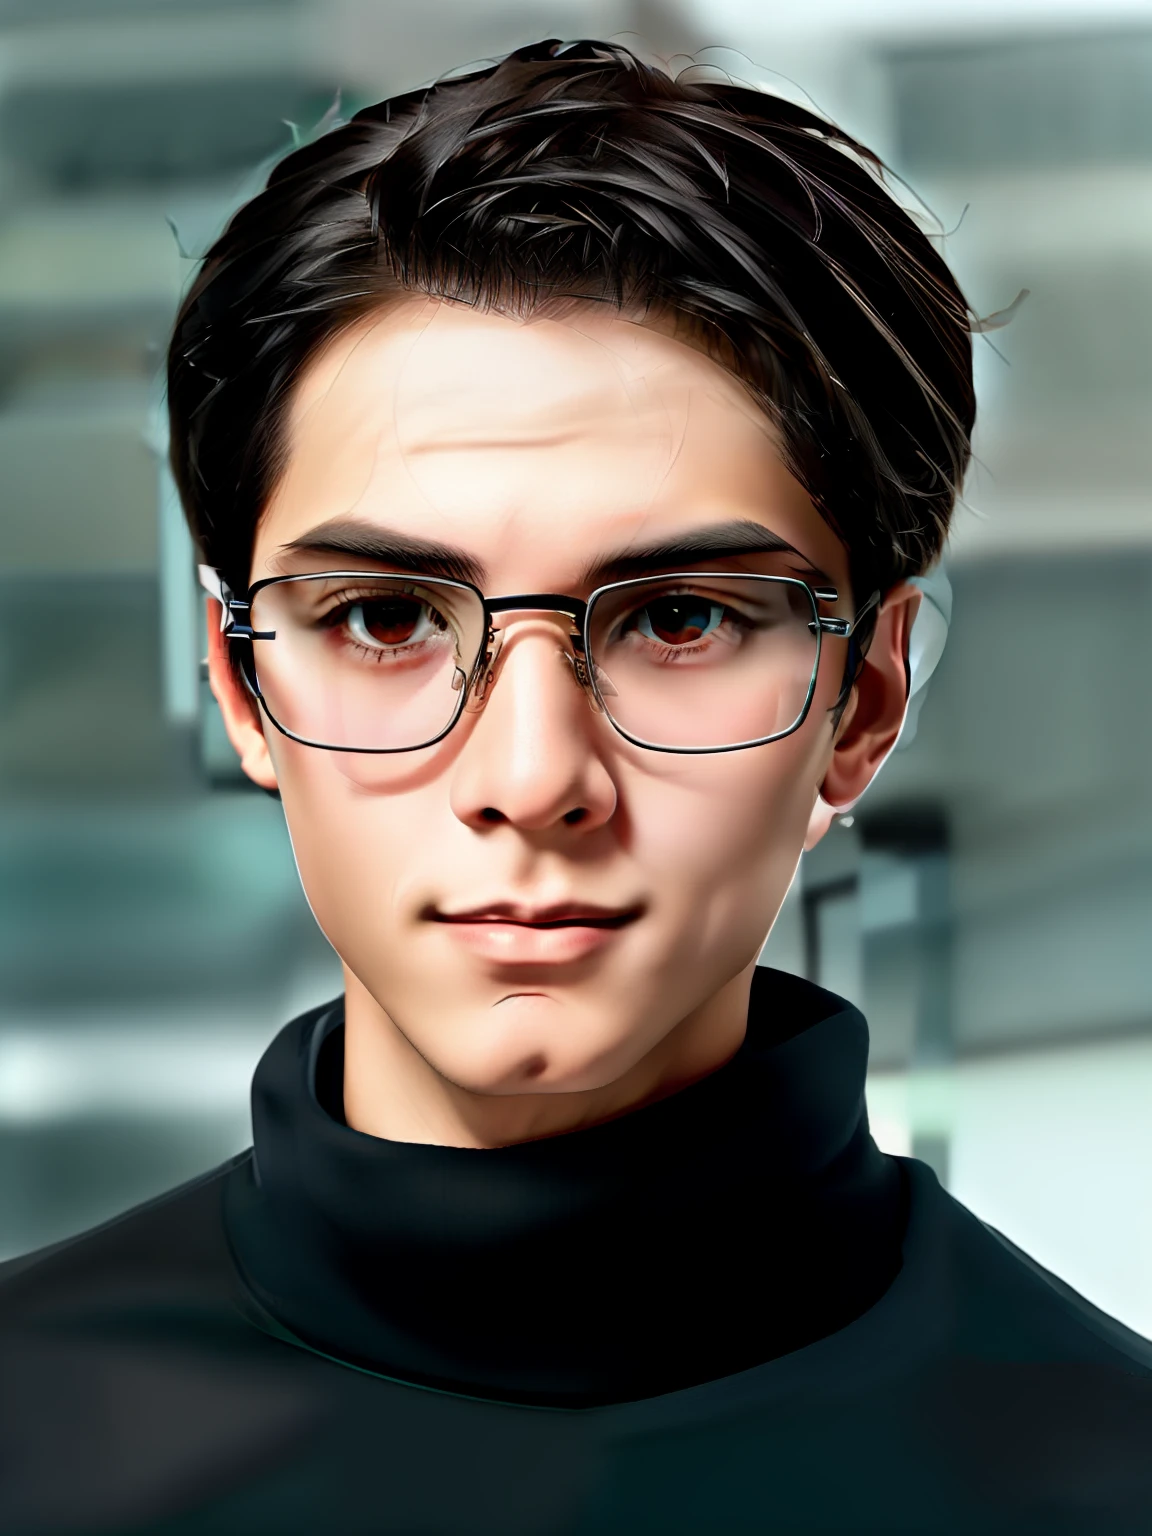 Man in glasses and a turtleneck sweater sitting on a couch, imagem frontal, em torno de 1 9 anos, 18 anos, Alex, jewish young man with glasses, 1 6 anos, Riyahd Cassiem, imagem de qualidade muito baixa, staring directly at camera, Mohamed Chahin, With eye Glasses, with glasses on, foto de perfil profissional